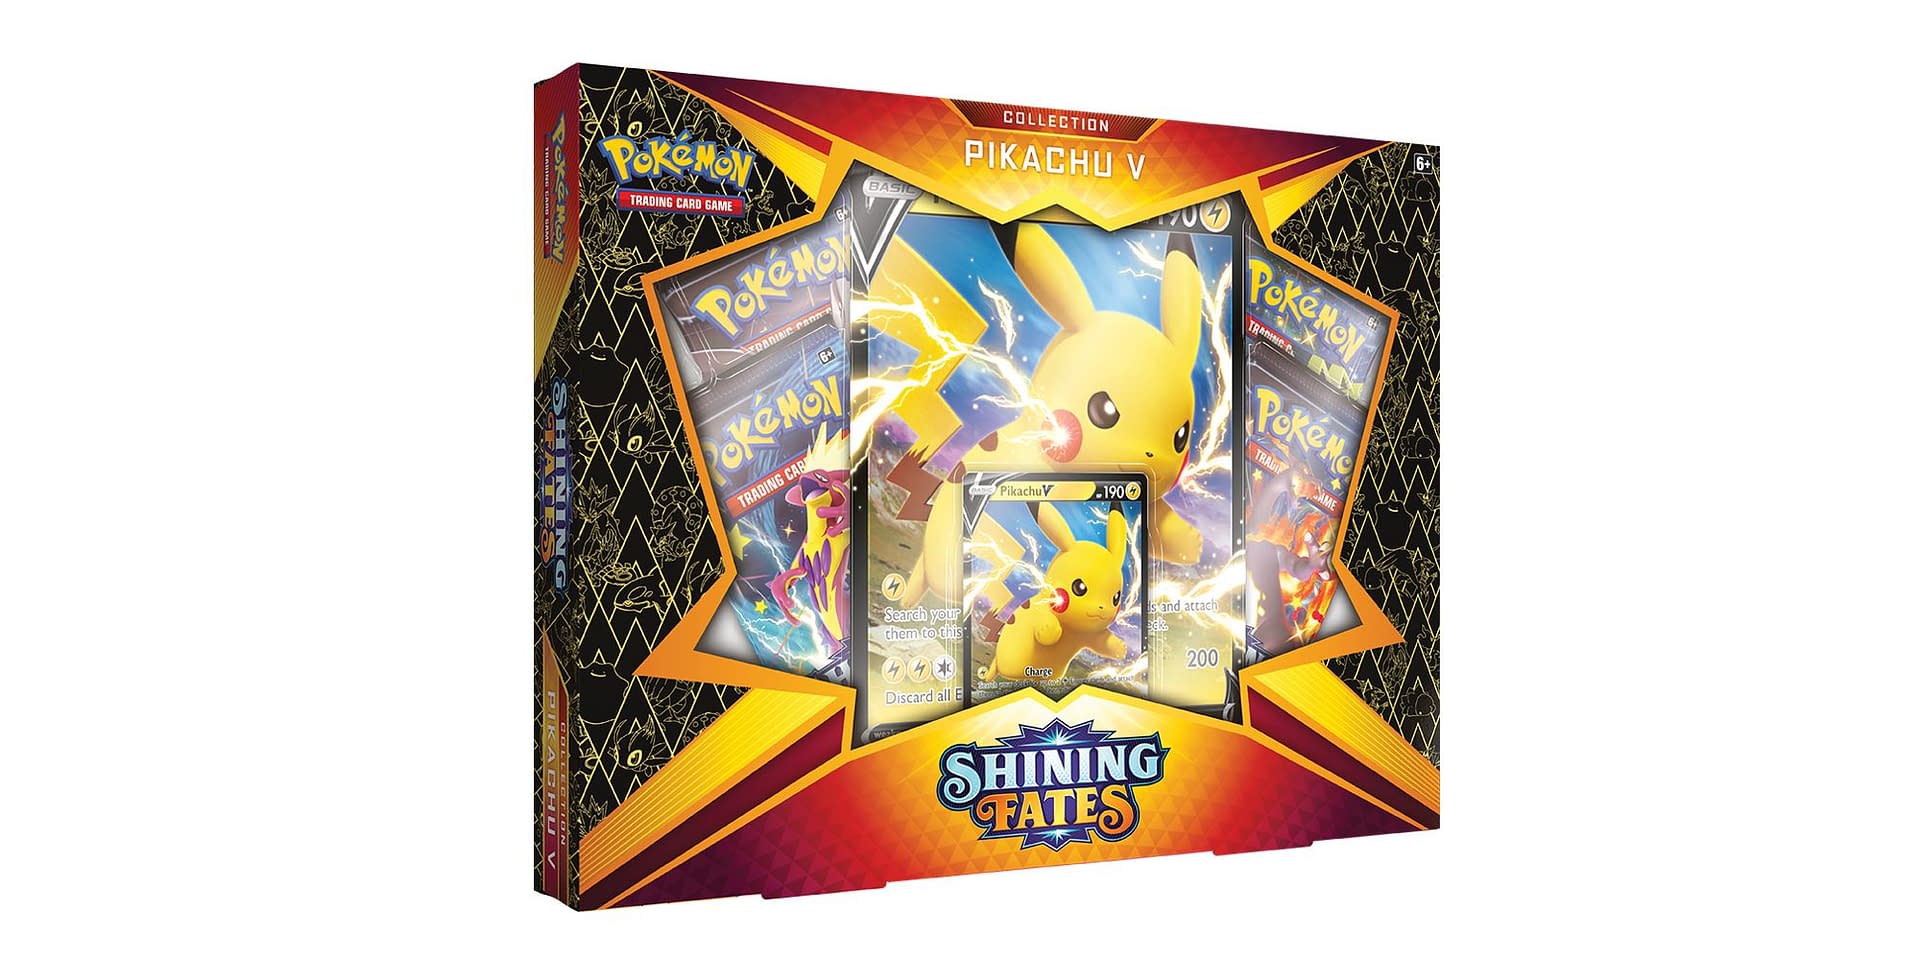 4x Shining Fates Booster Pack Sealed Official Pokemon Cards One of each art! 